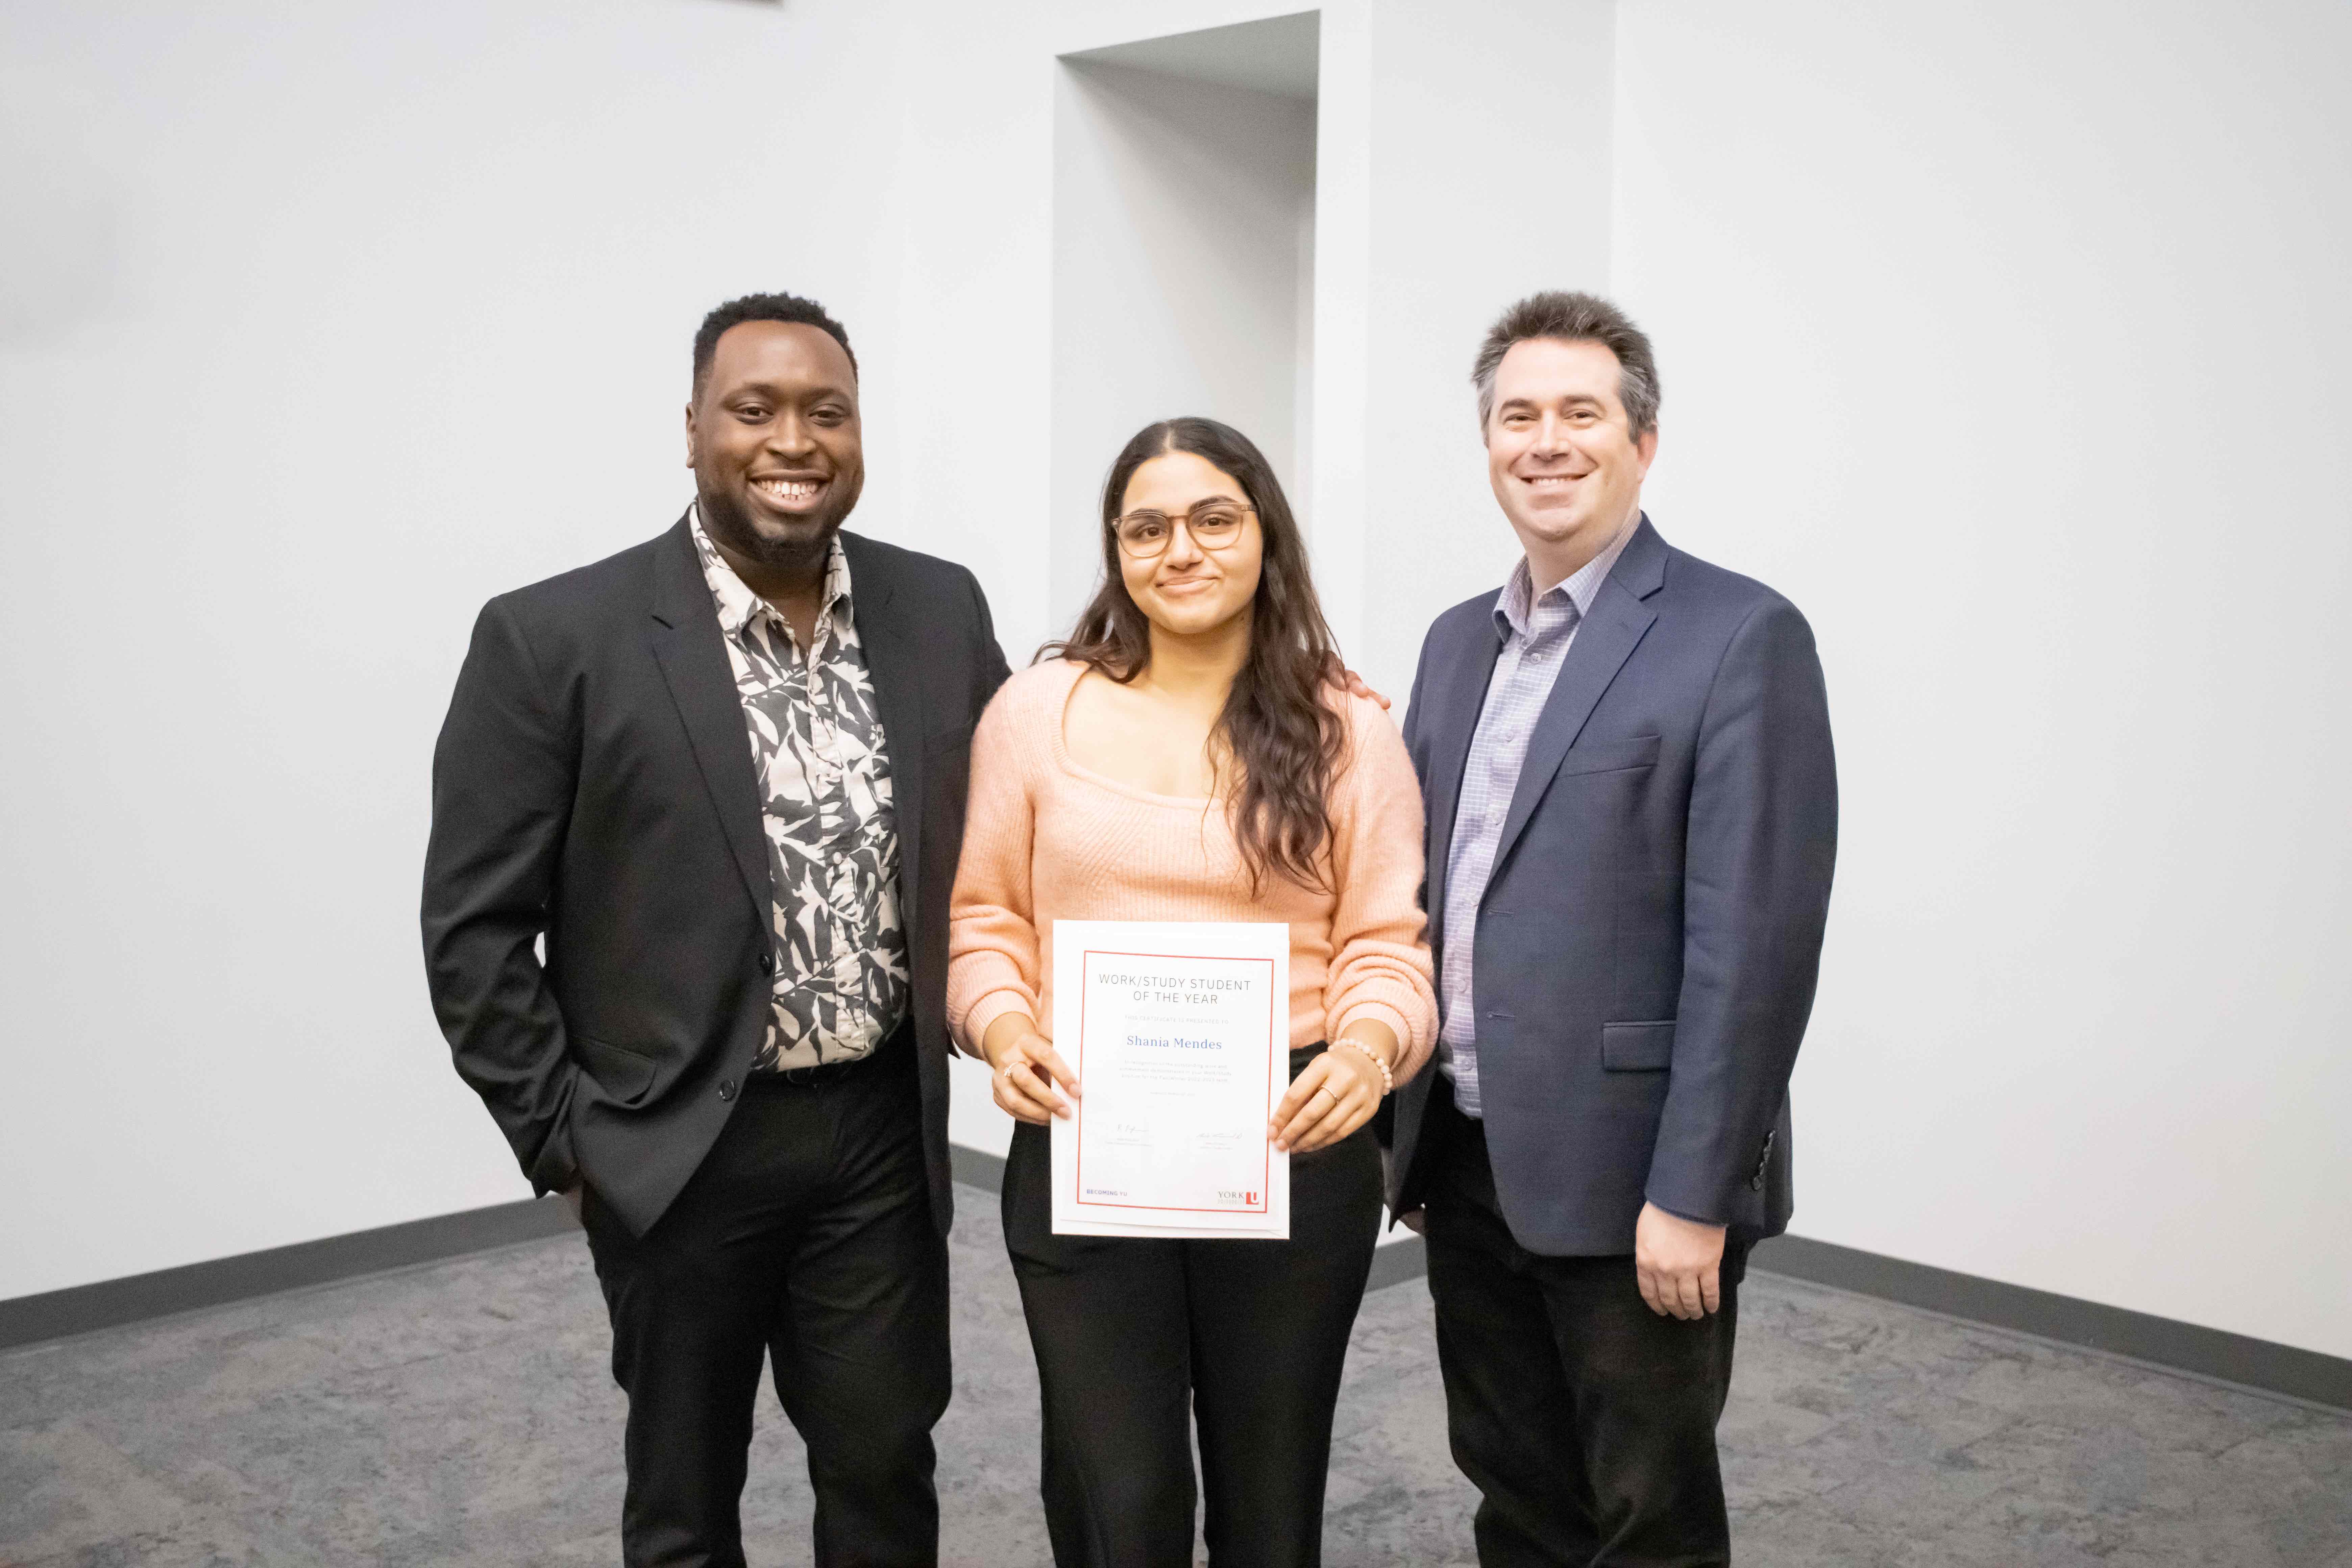 Shania Mendes receiving her award for Becoming YU Student of the Year